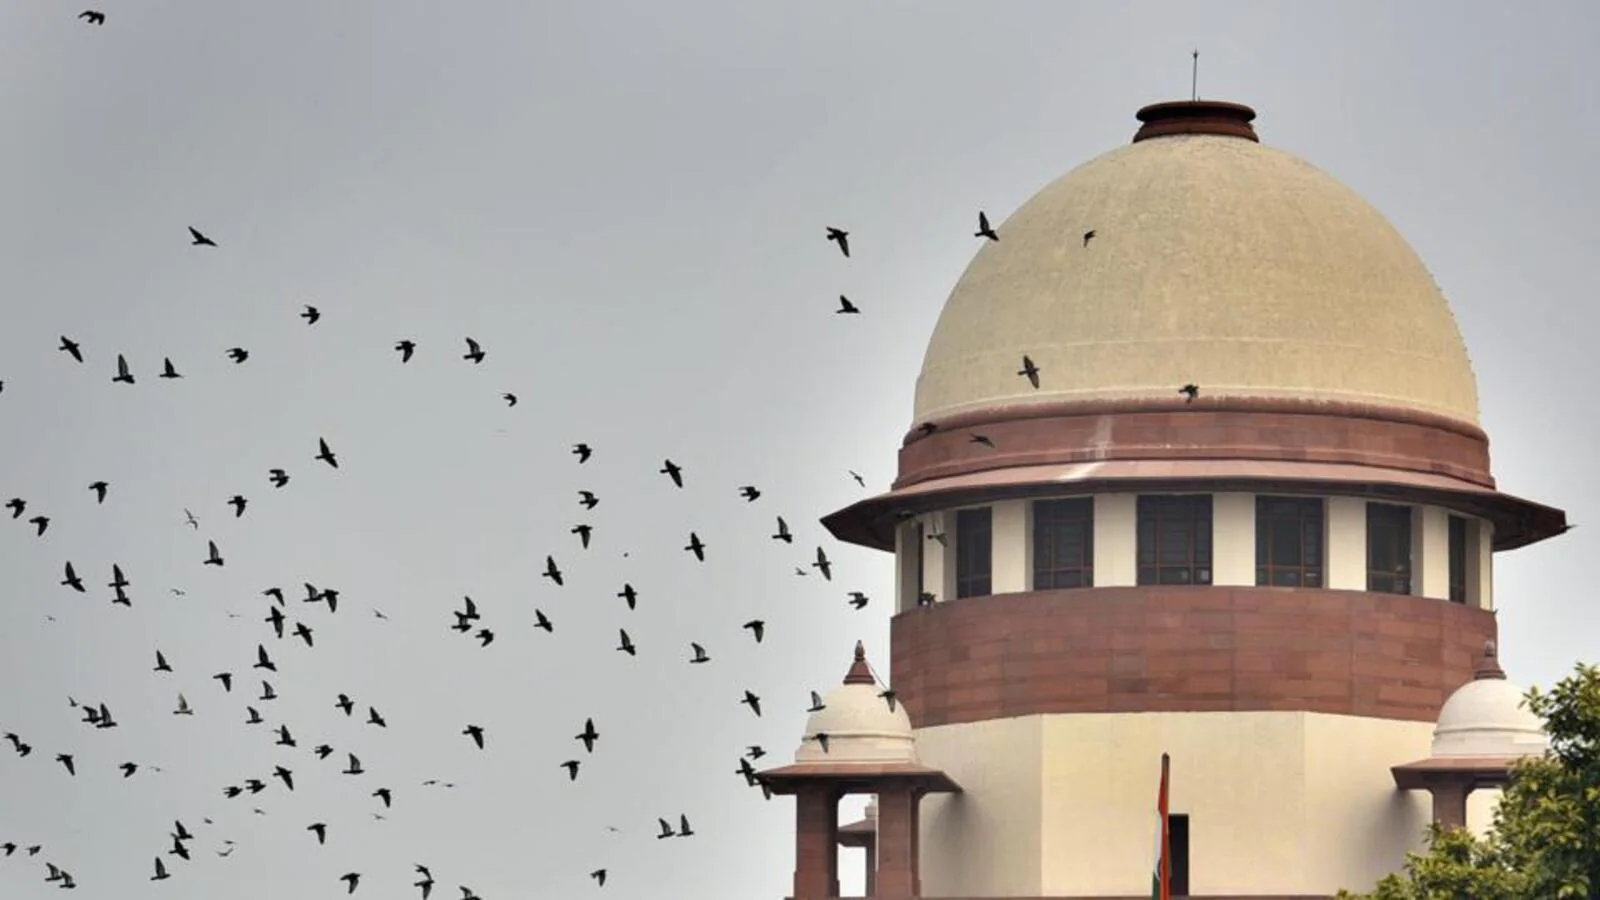 SC seeks status on measures to protect GIB, says ‘conscious of need for development’